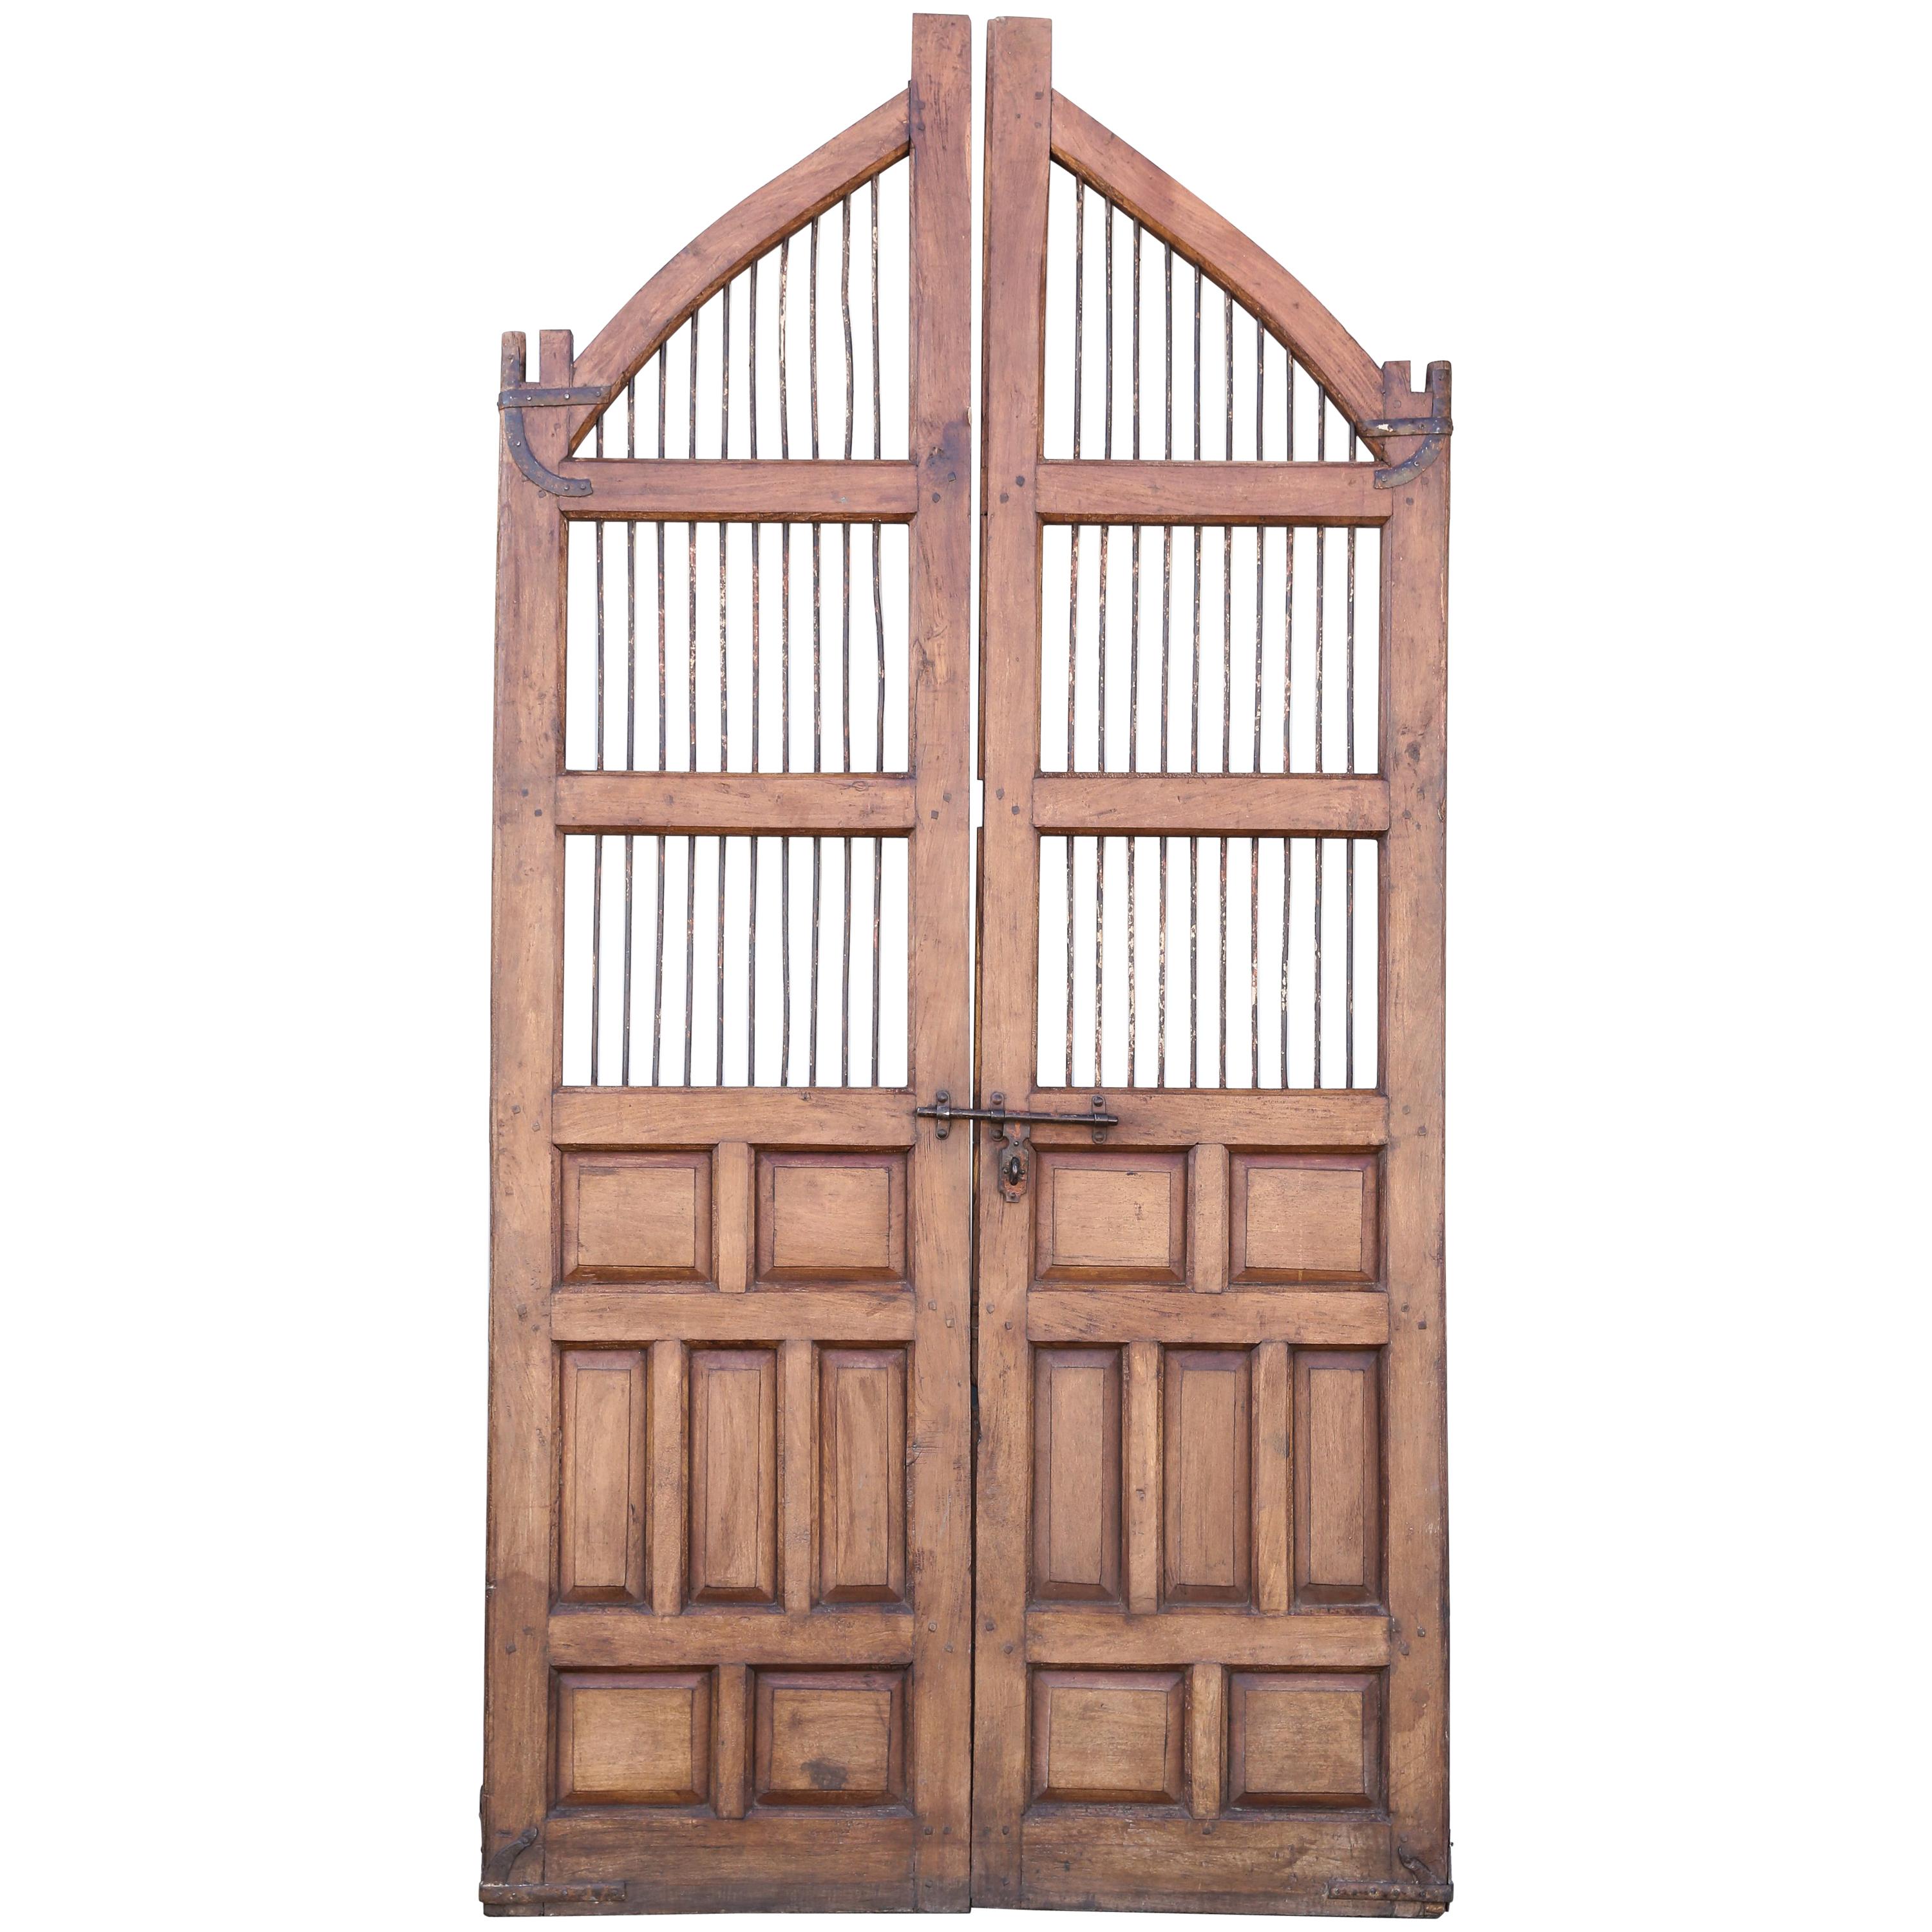 1820s Solid Teak Wood Side Entry Door of a Feudal Landlord's Court Yard Home For Sale